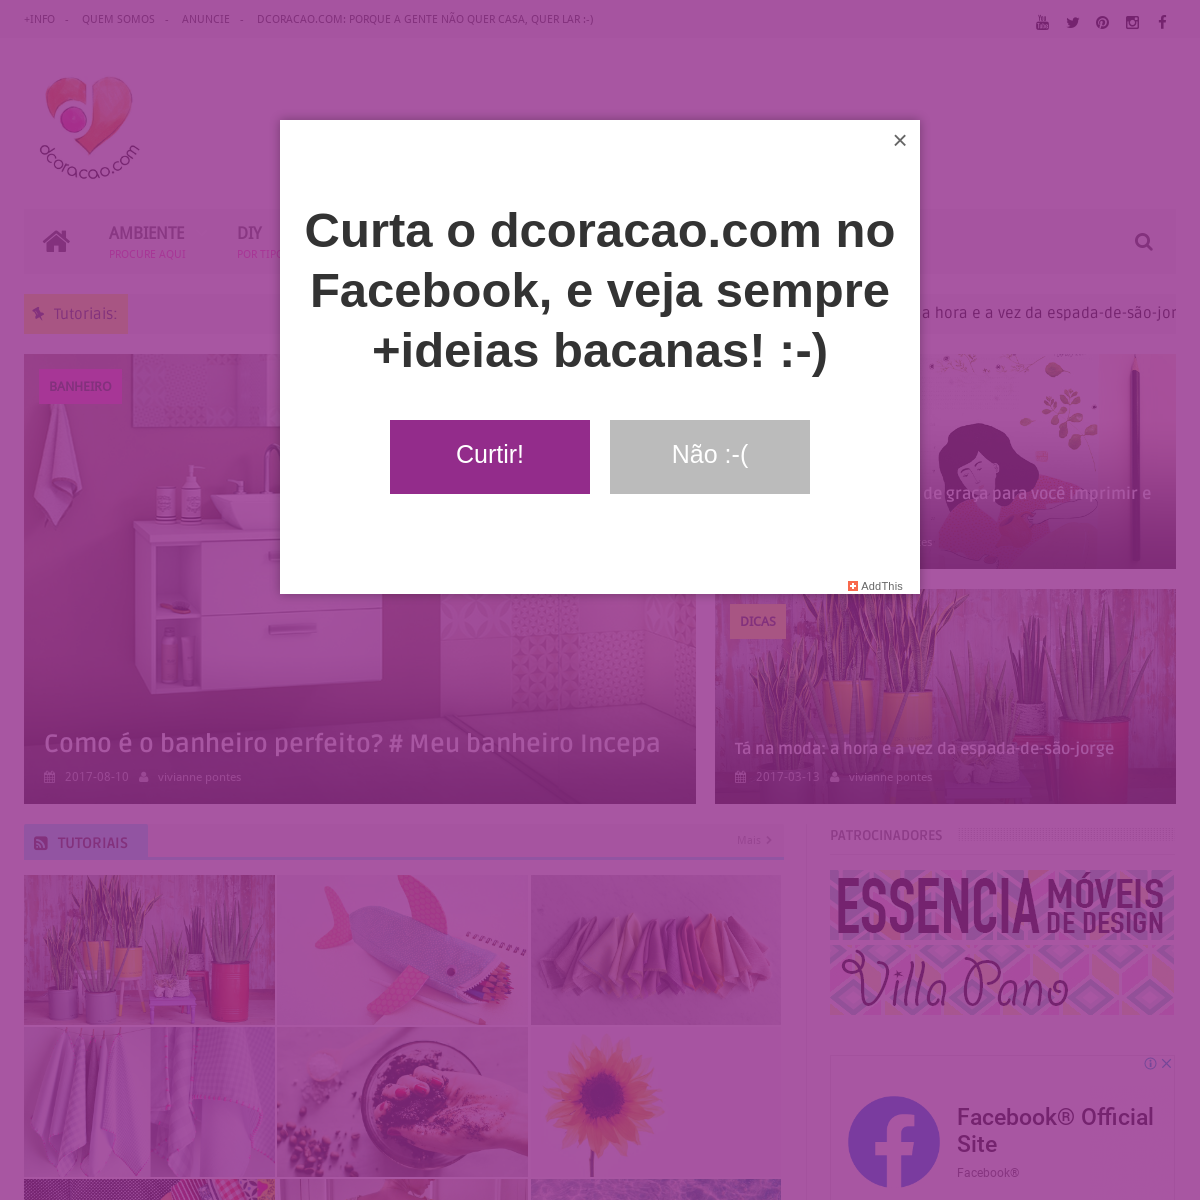 A complete backup of dcoracao.com